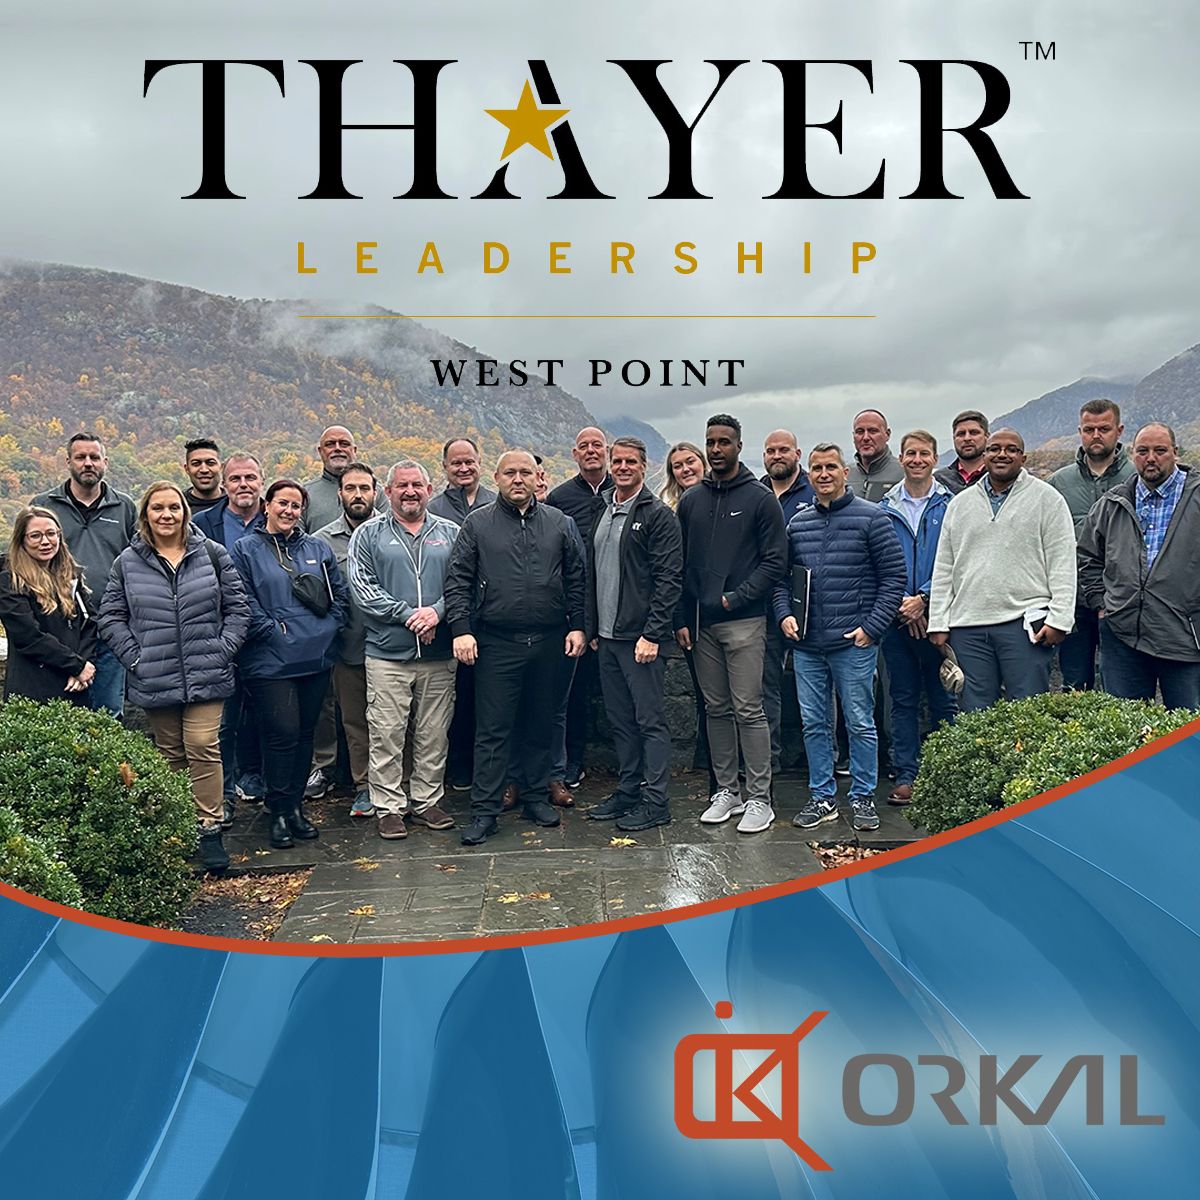 group of professionals posing for a photo at a thayer leadership training program event at west point, featuring the thayer and orkal logos.